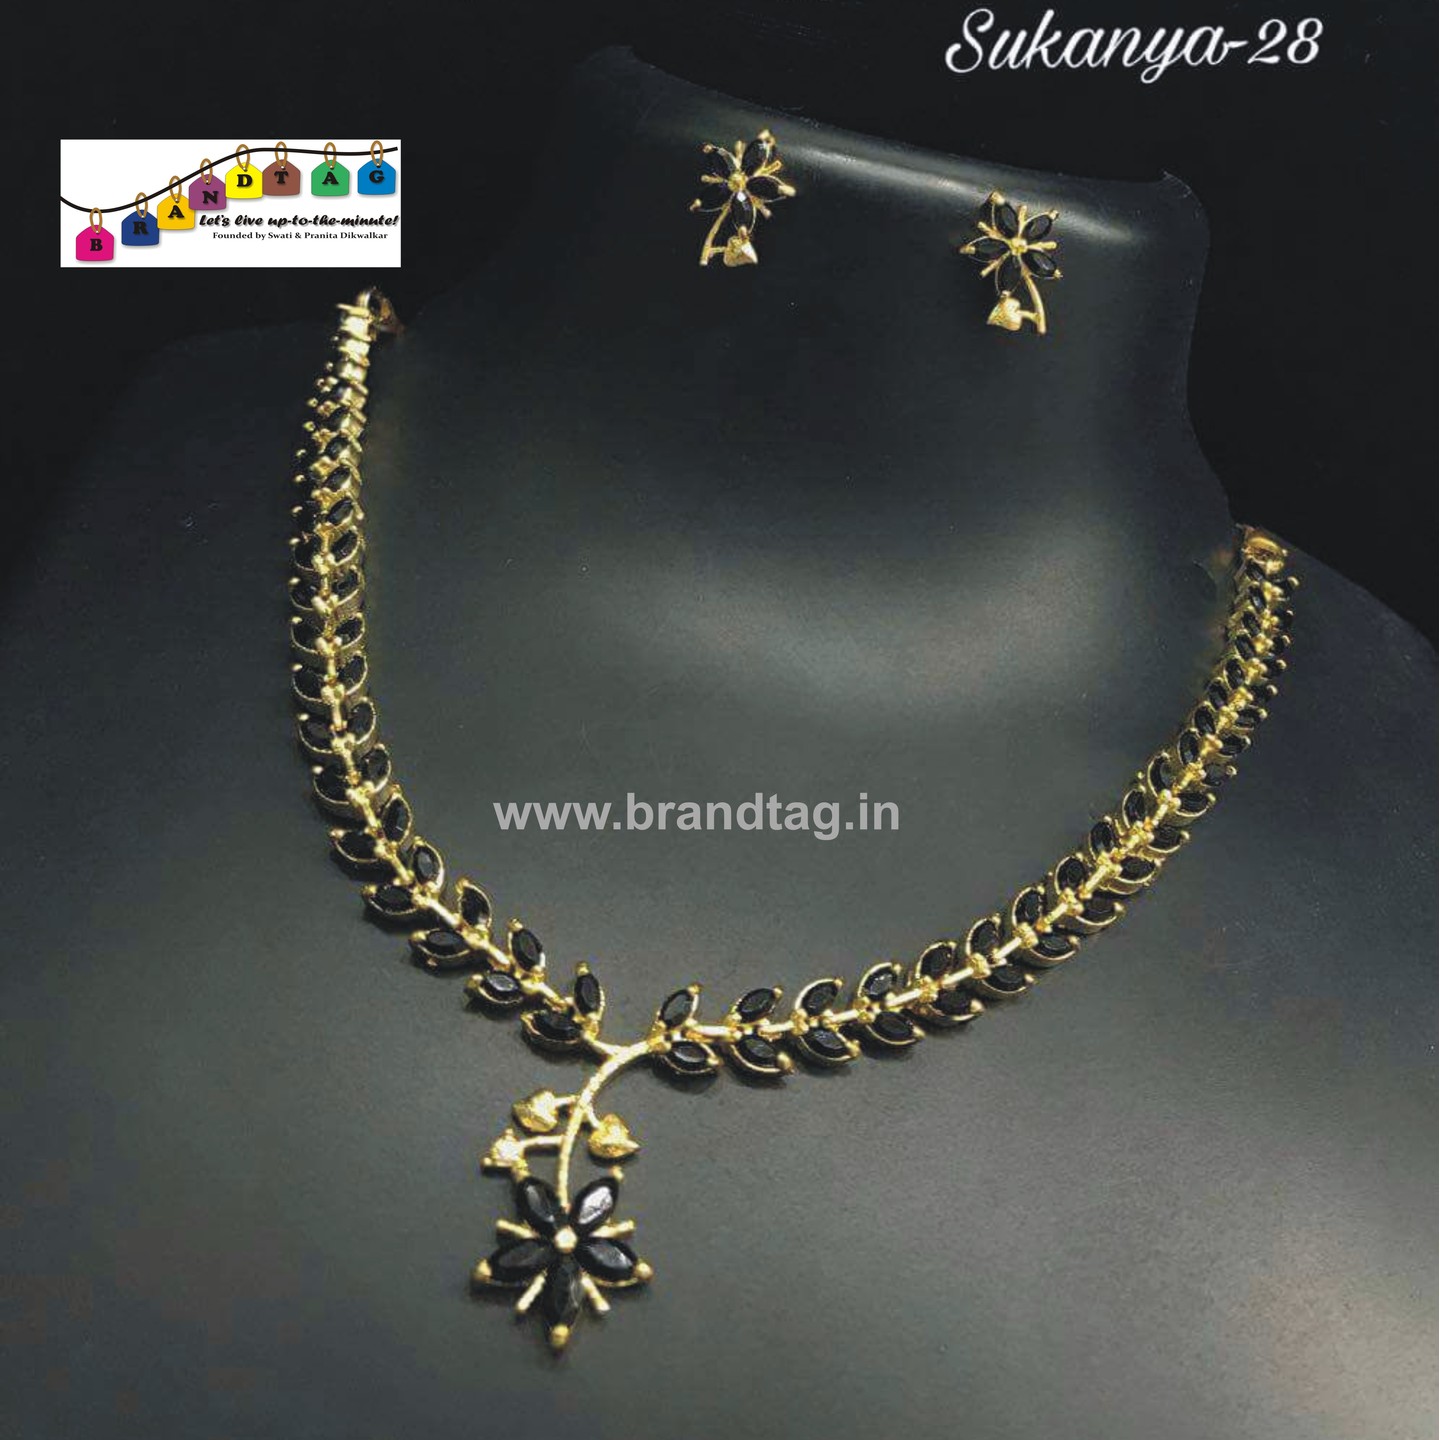 Traditional Yet Contemporary Necklace set!